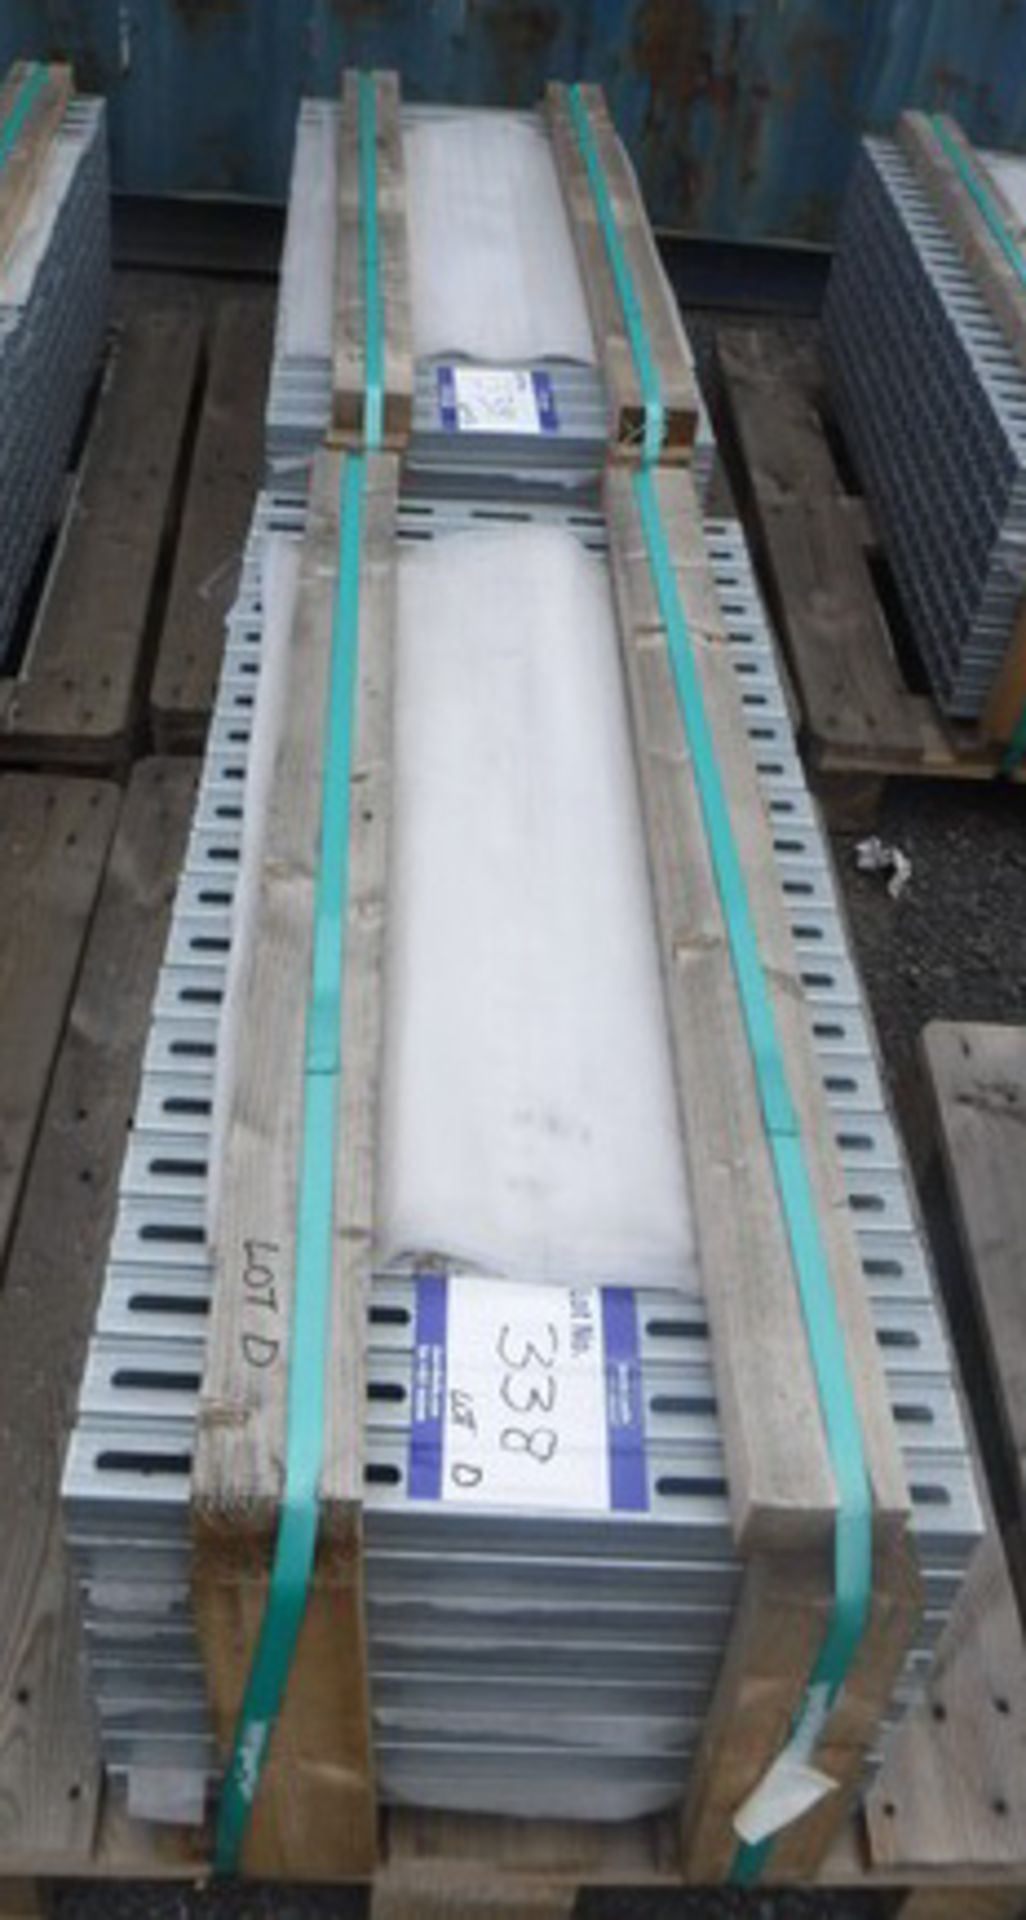 HILTI chanel 0.5m long x 2mm - 352 lengths. New, used in construction for shelving.